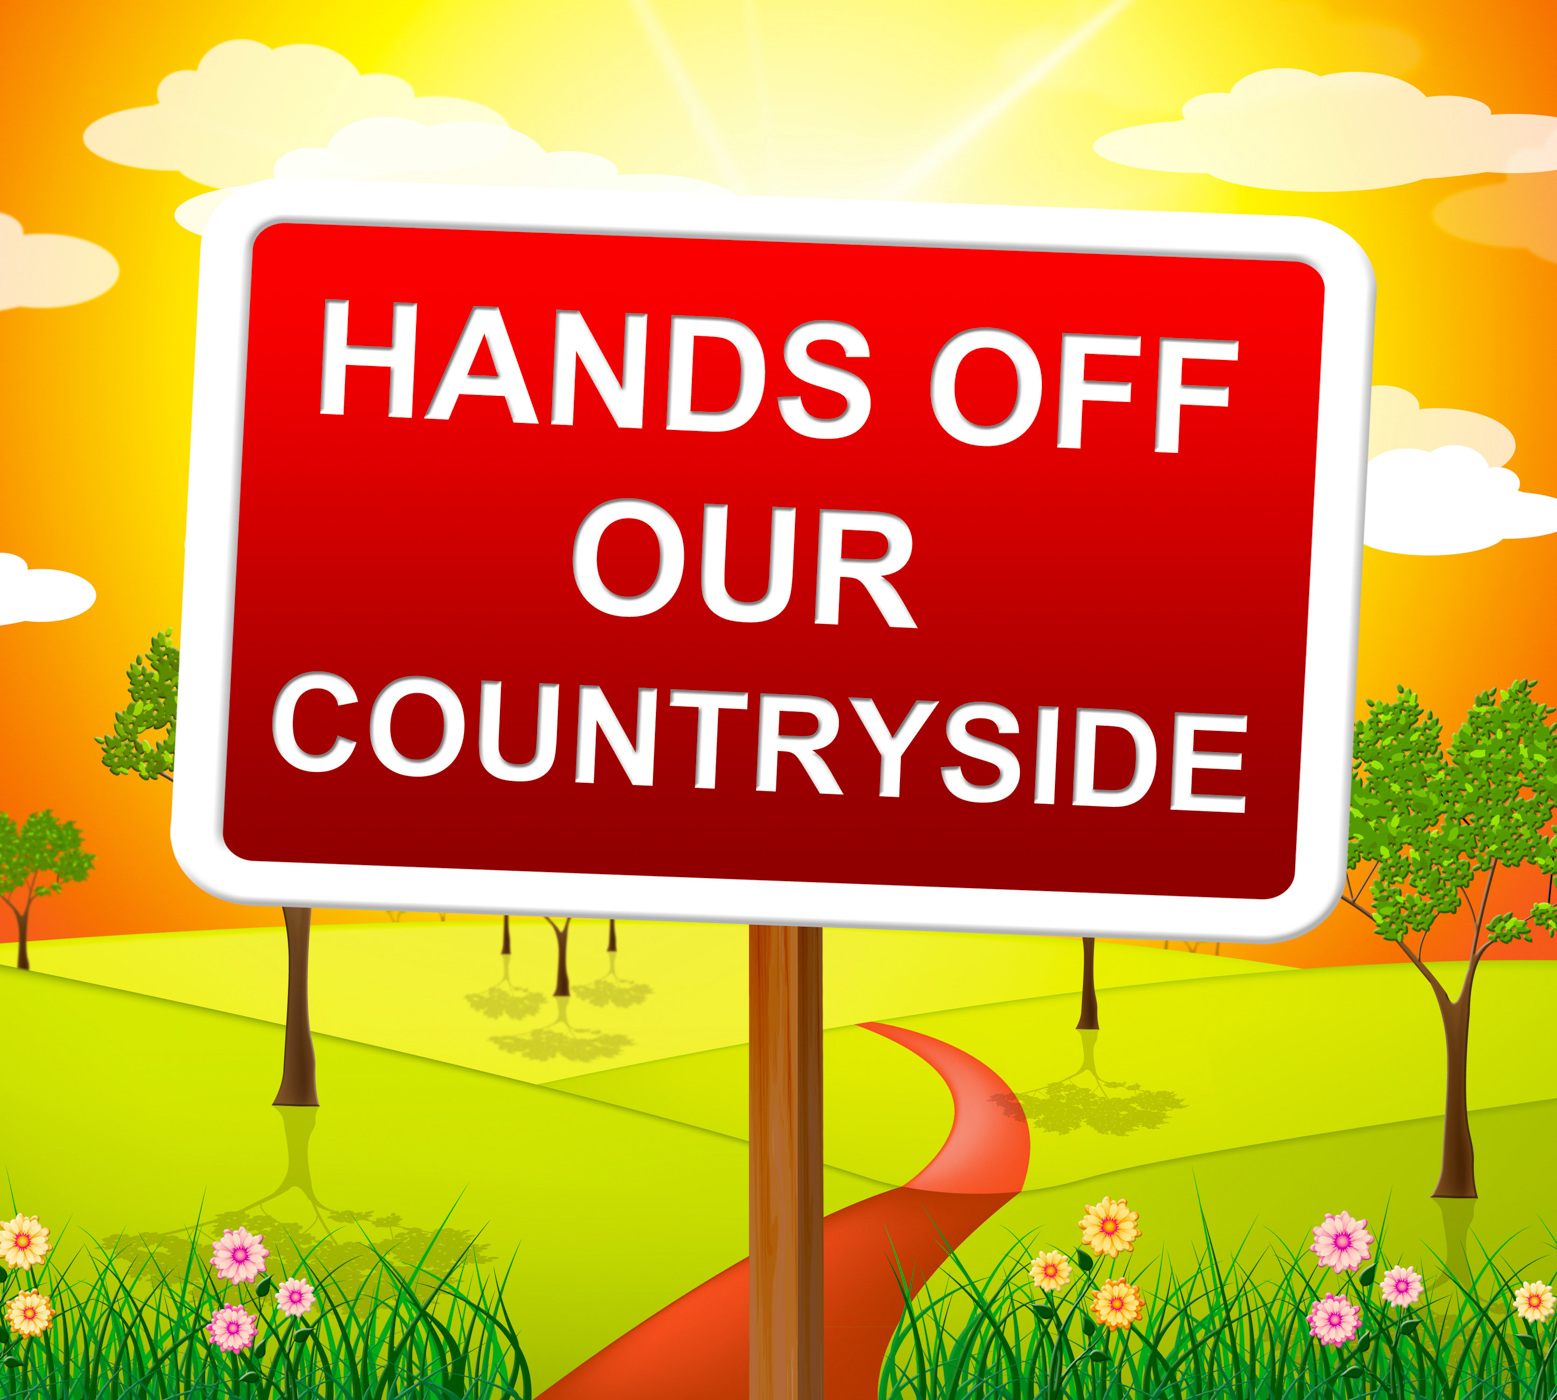 Hands off countryside indicates go away and picturesque photo